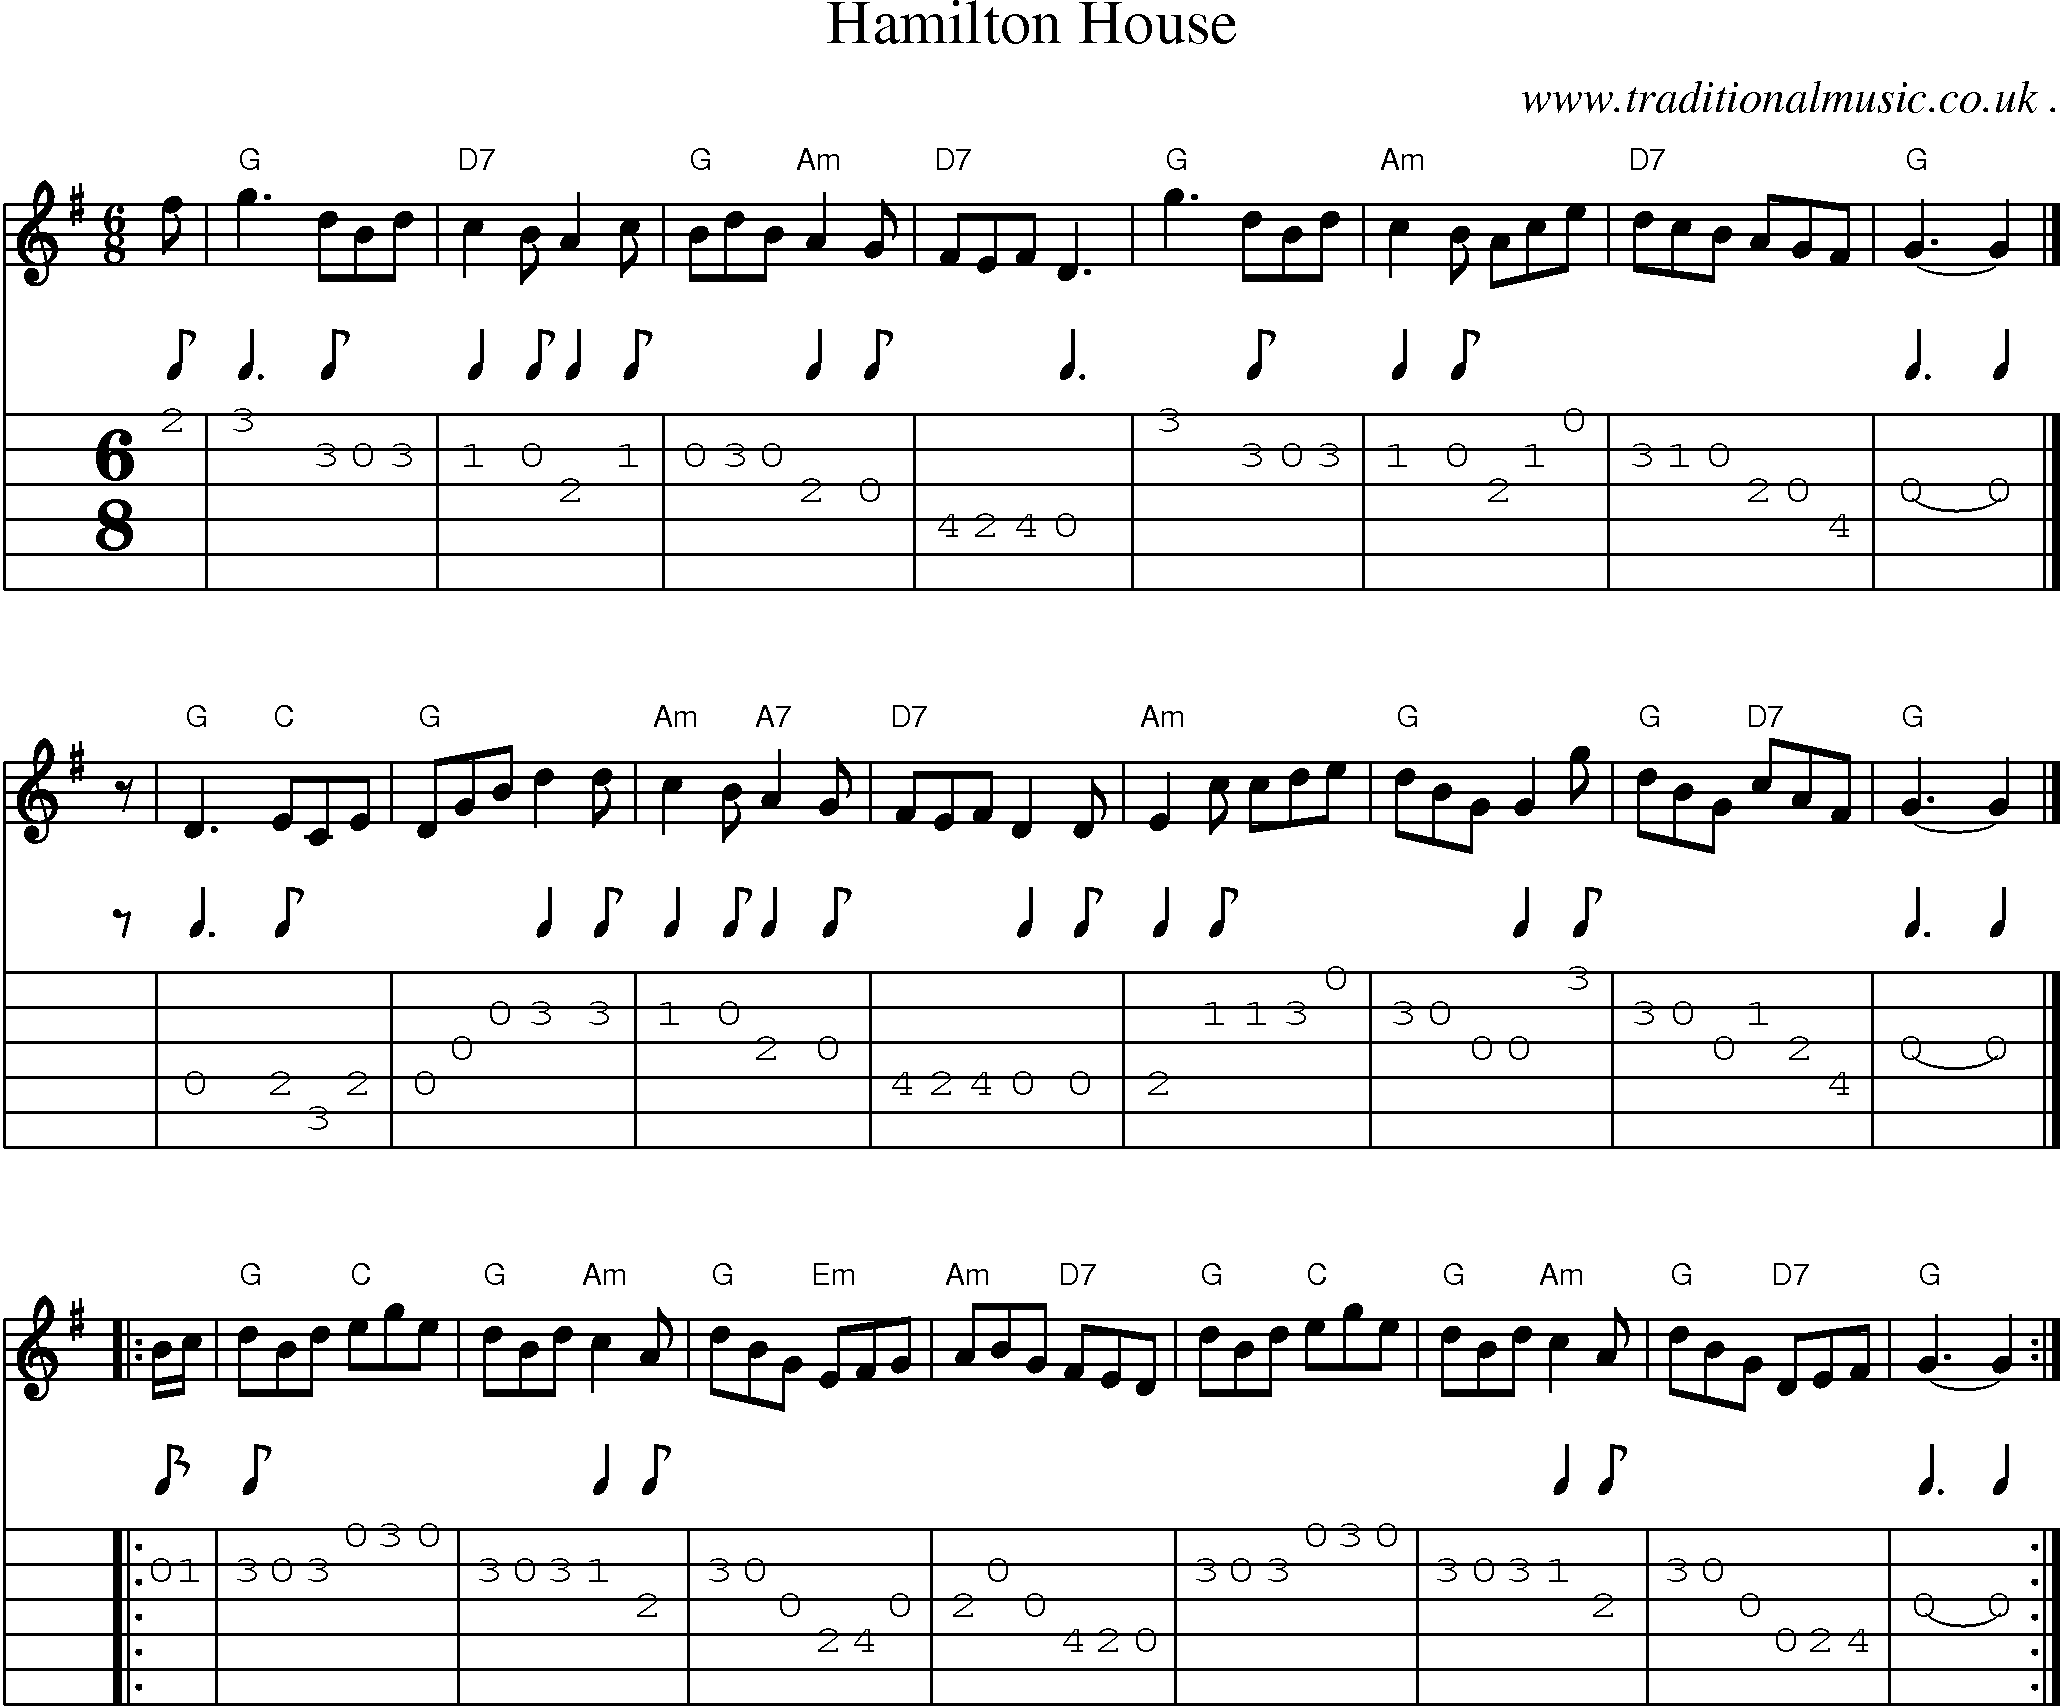 Sheet-music  score, Chords and Guitar Tabs for Hamilton House